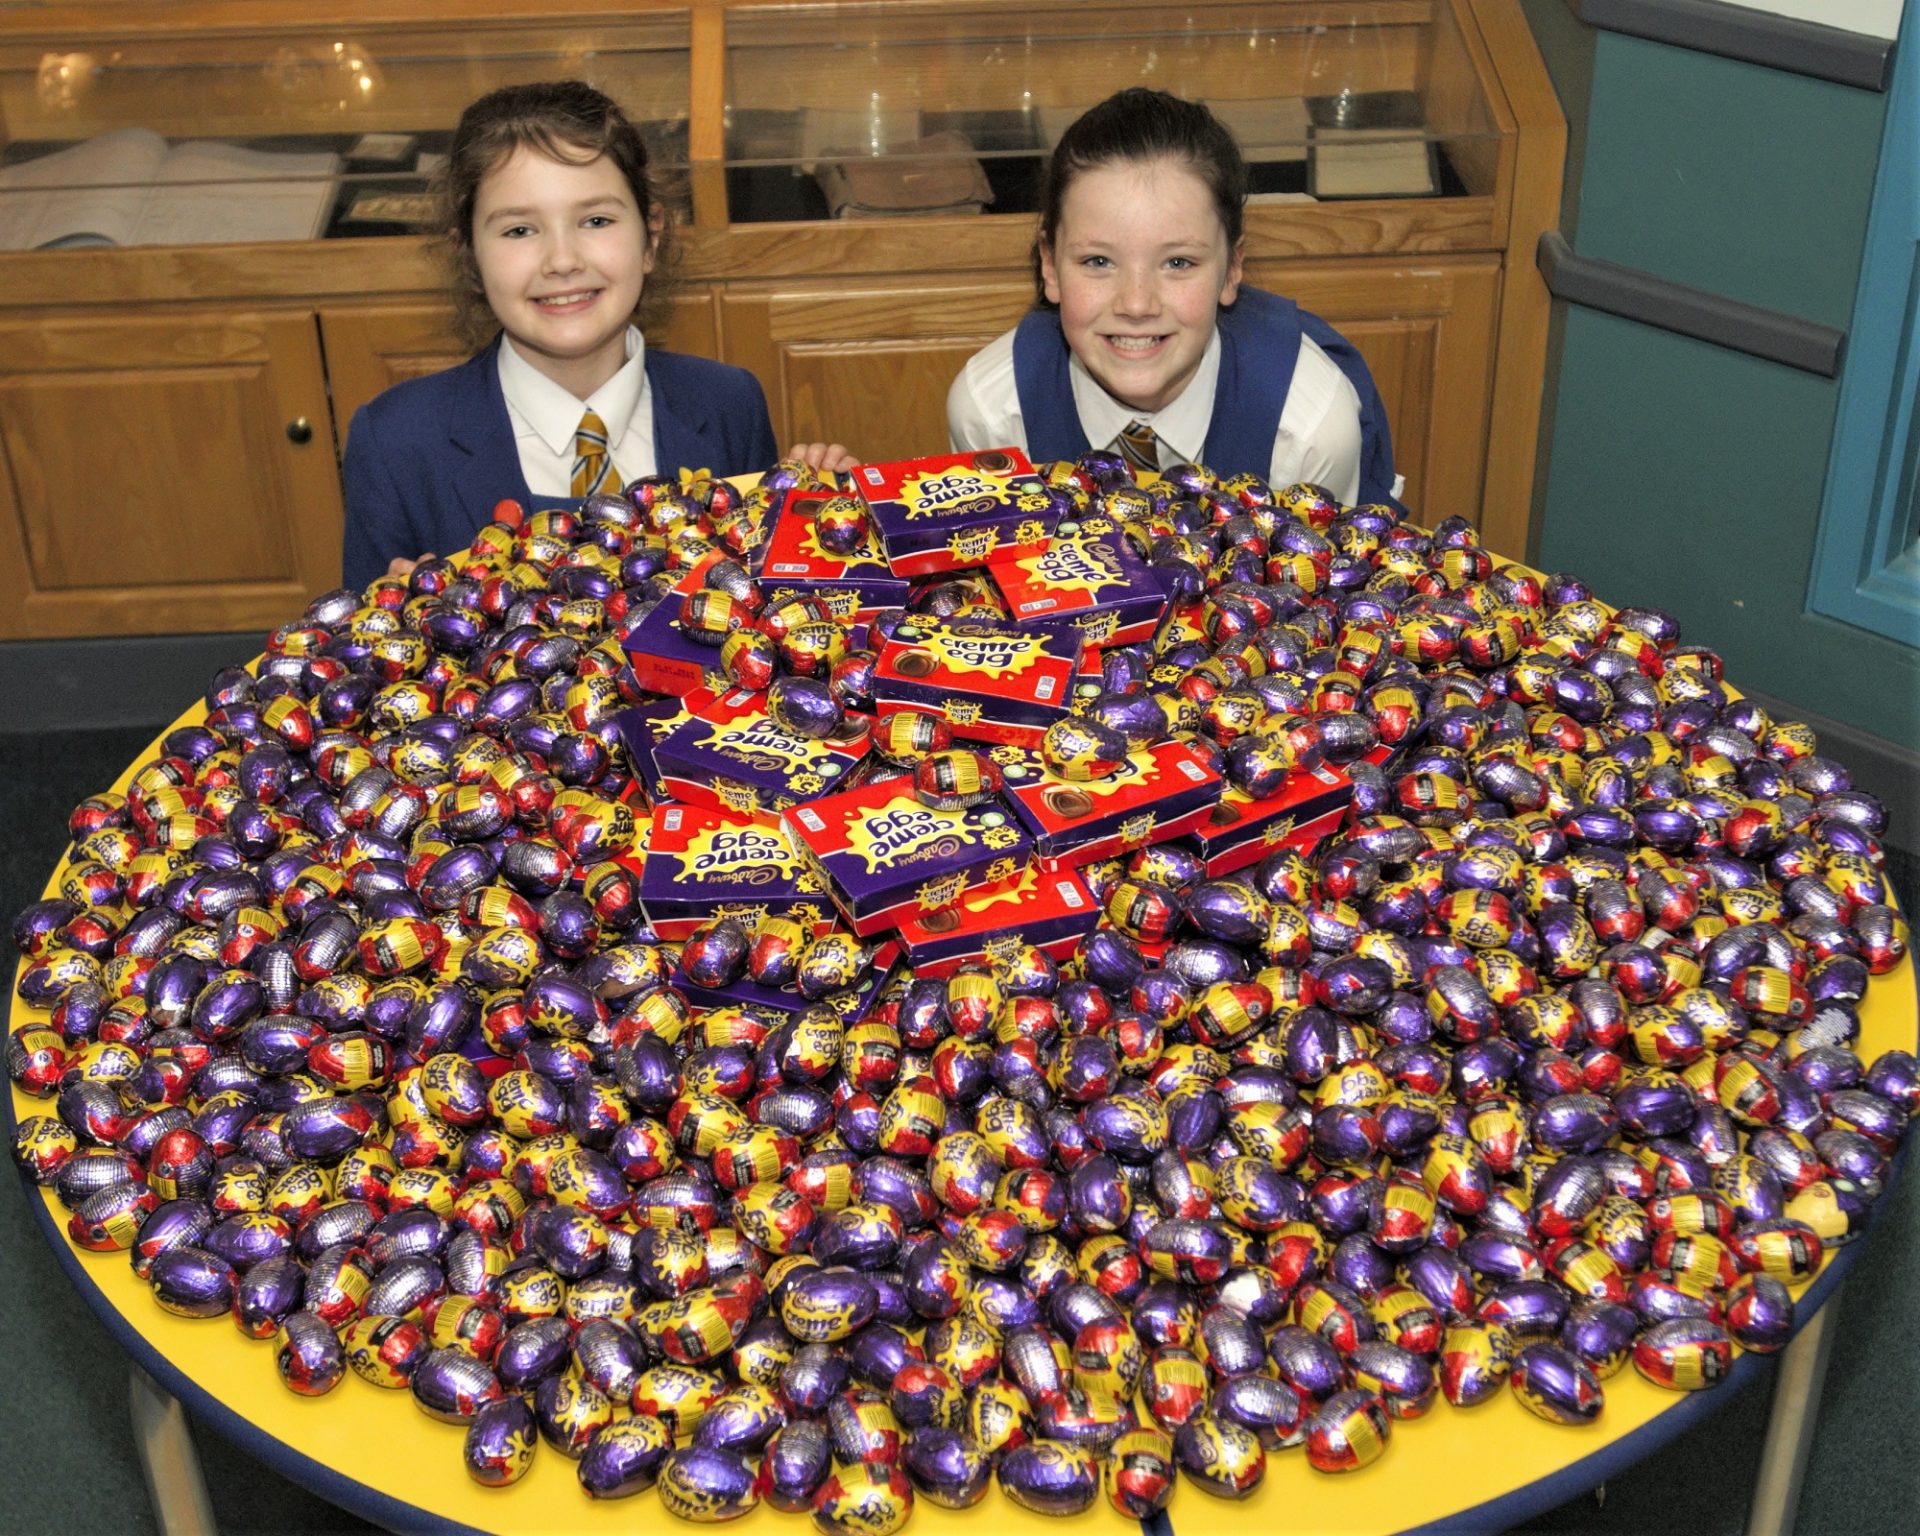 Caia and Olivia with creme egg donation from Lady Barn House School.